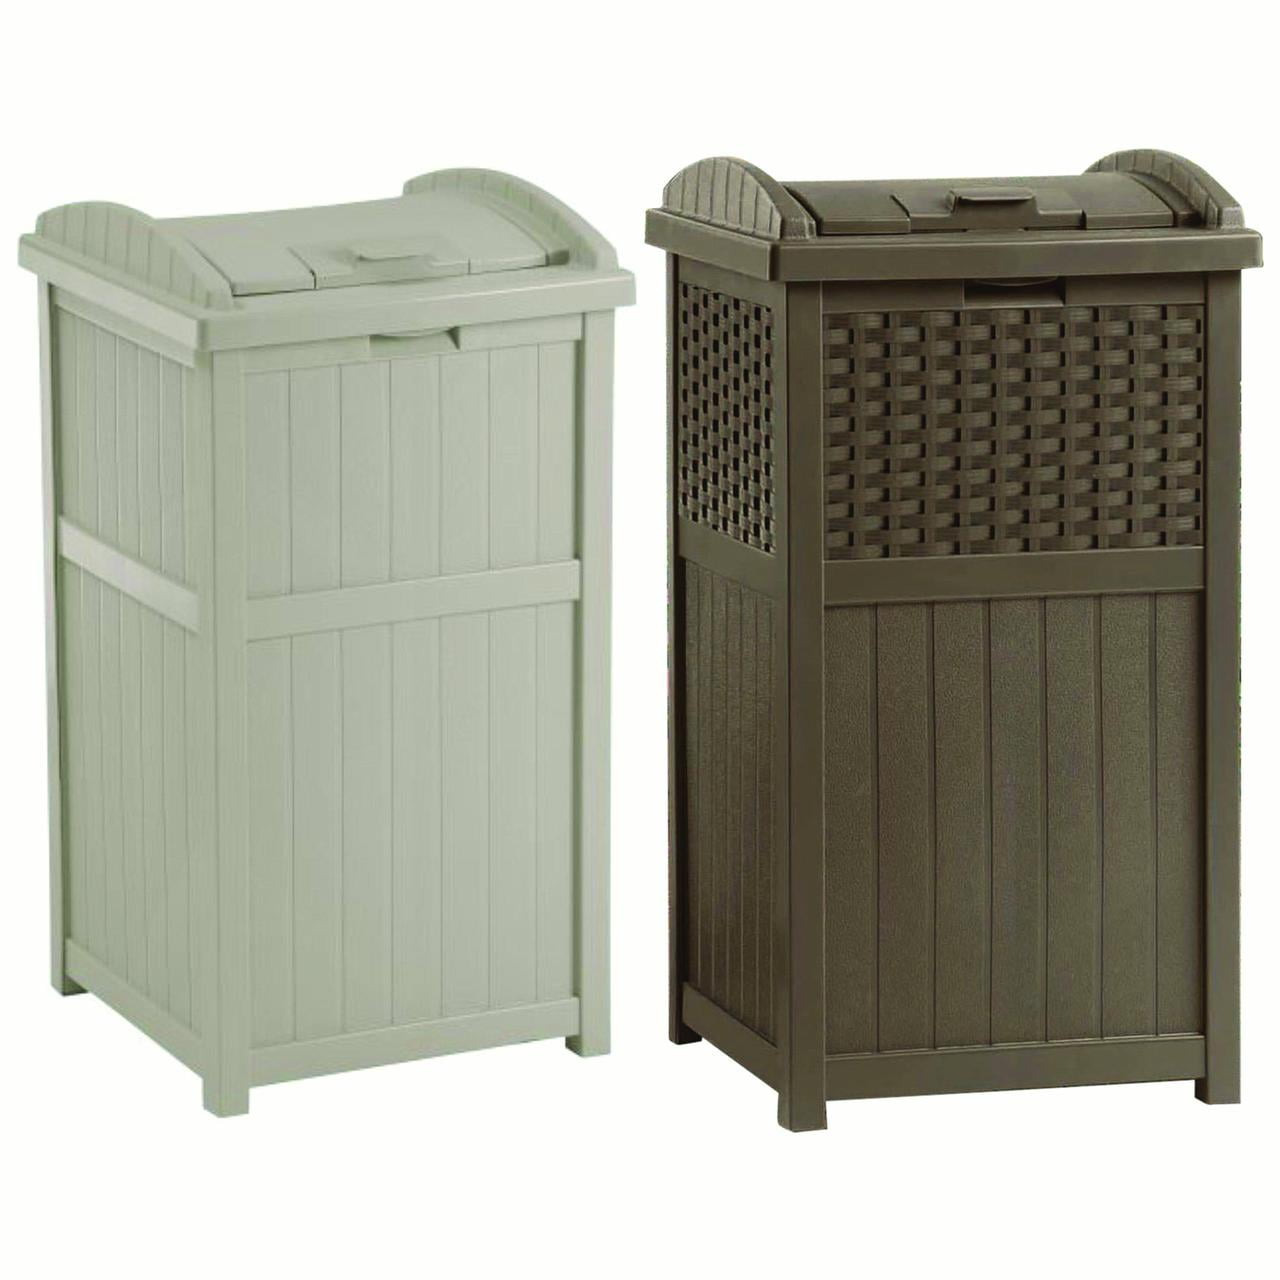 Suncast 39 Gal. Resin Patio Trash Can GH3900 - The Home Depot